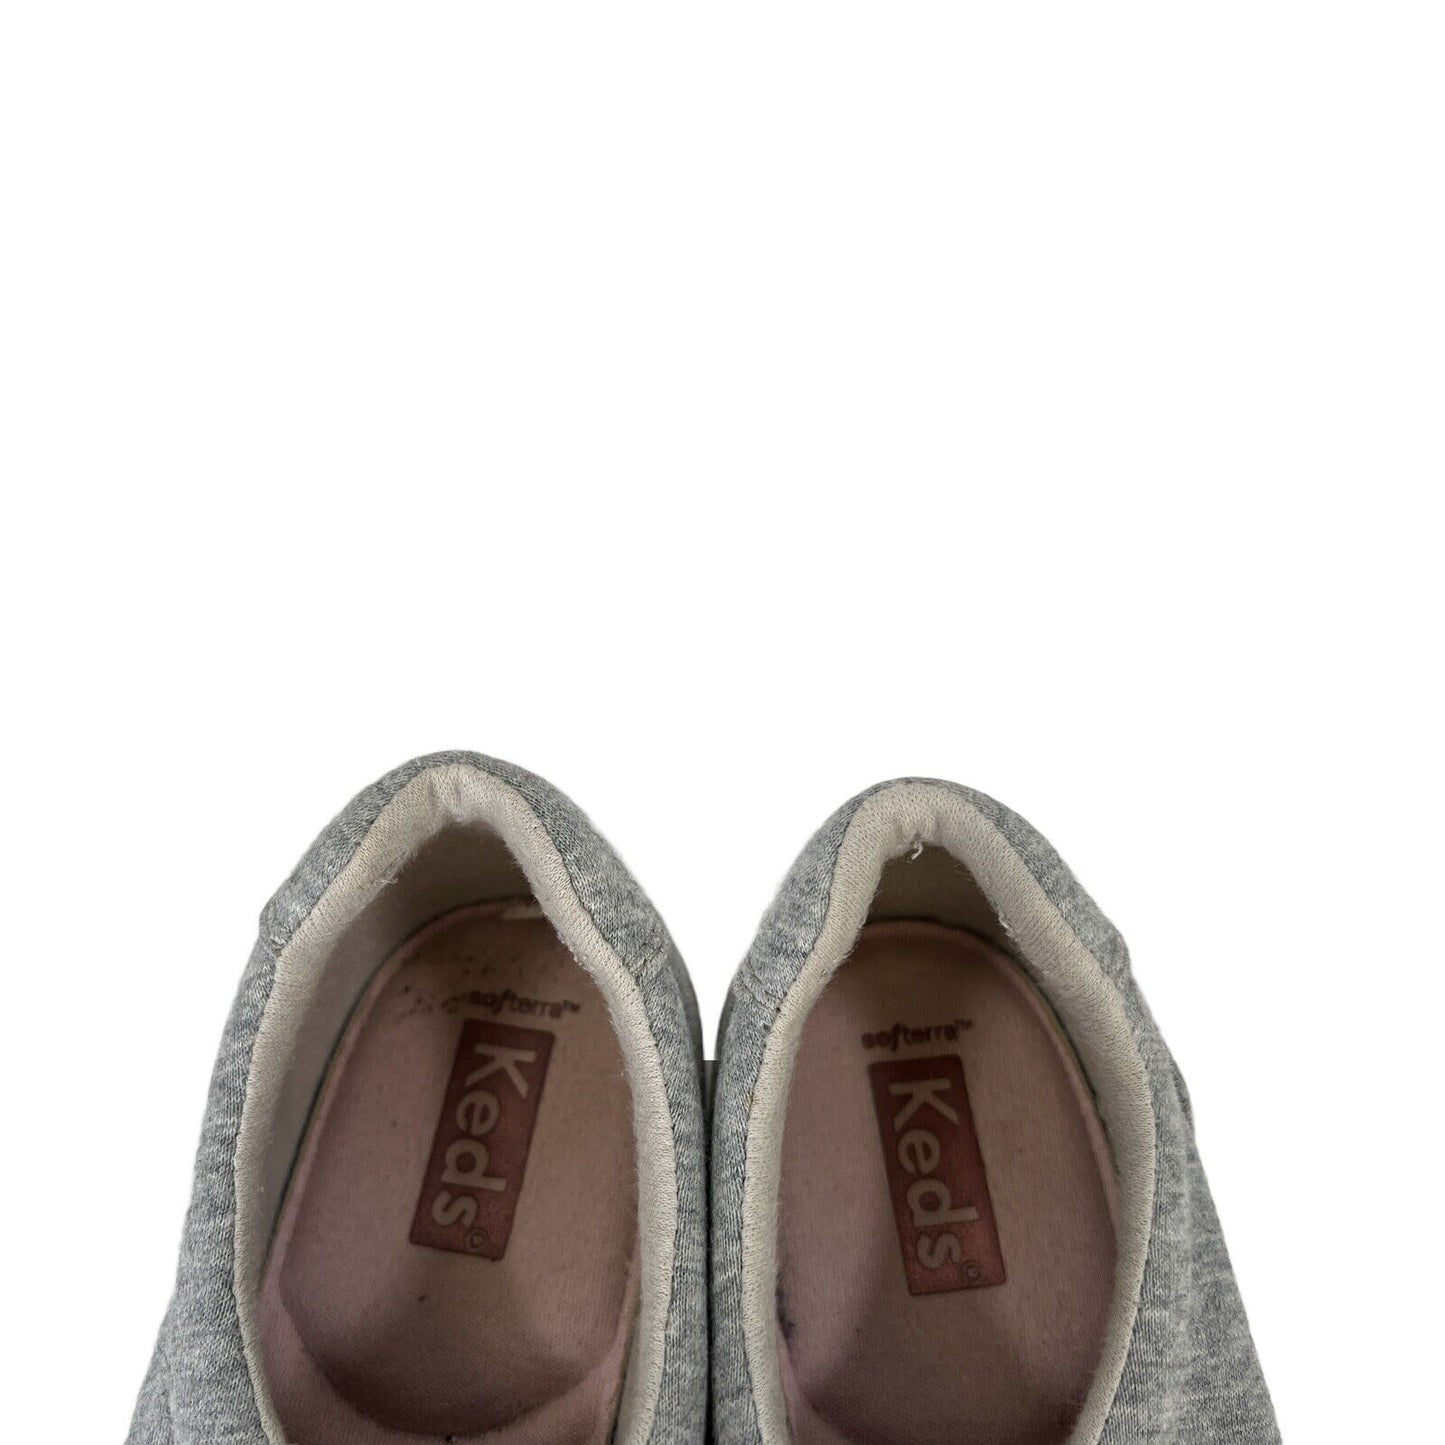 Keds Women's Gray Courty II Lace Up Casual Sneakers - 9